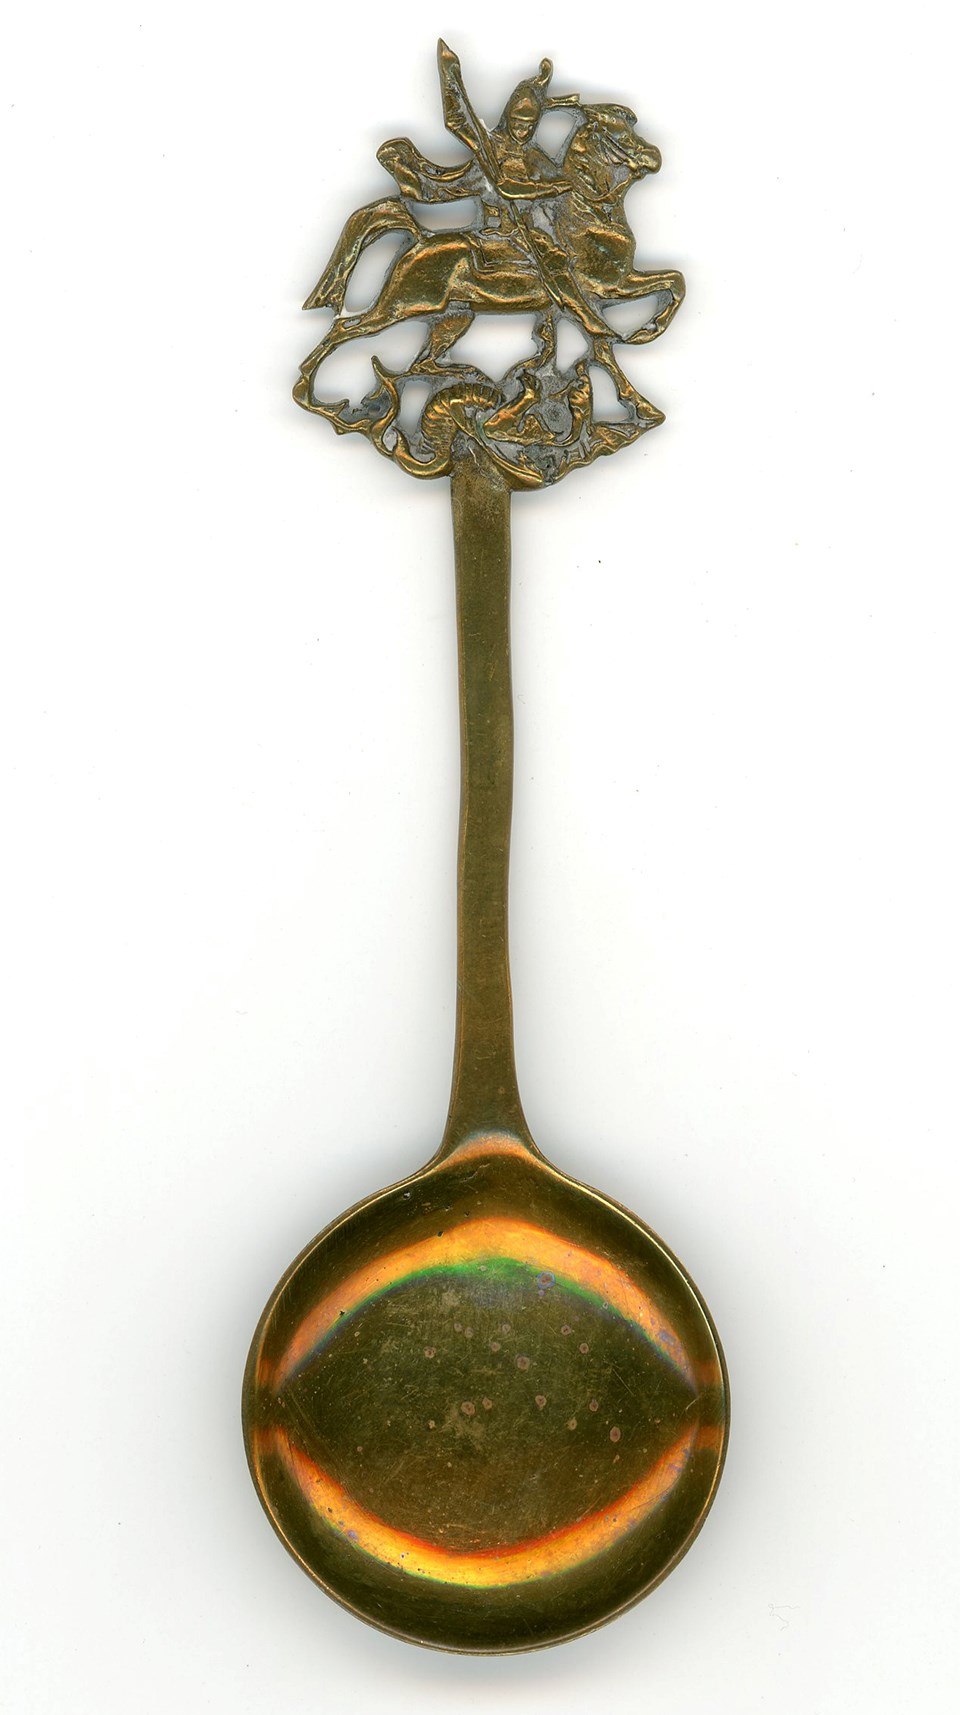 A brass souvenir spoon with a decorated handle showing St. George slaying a dragon.